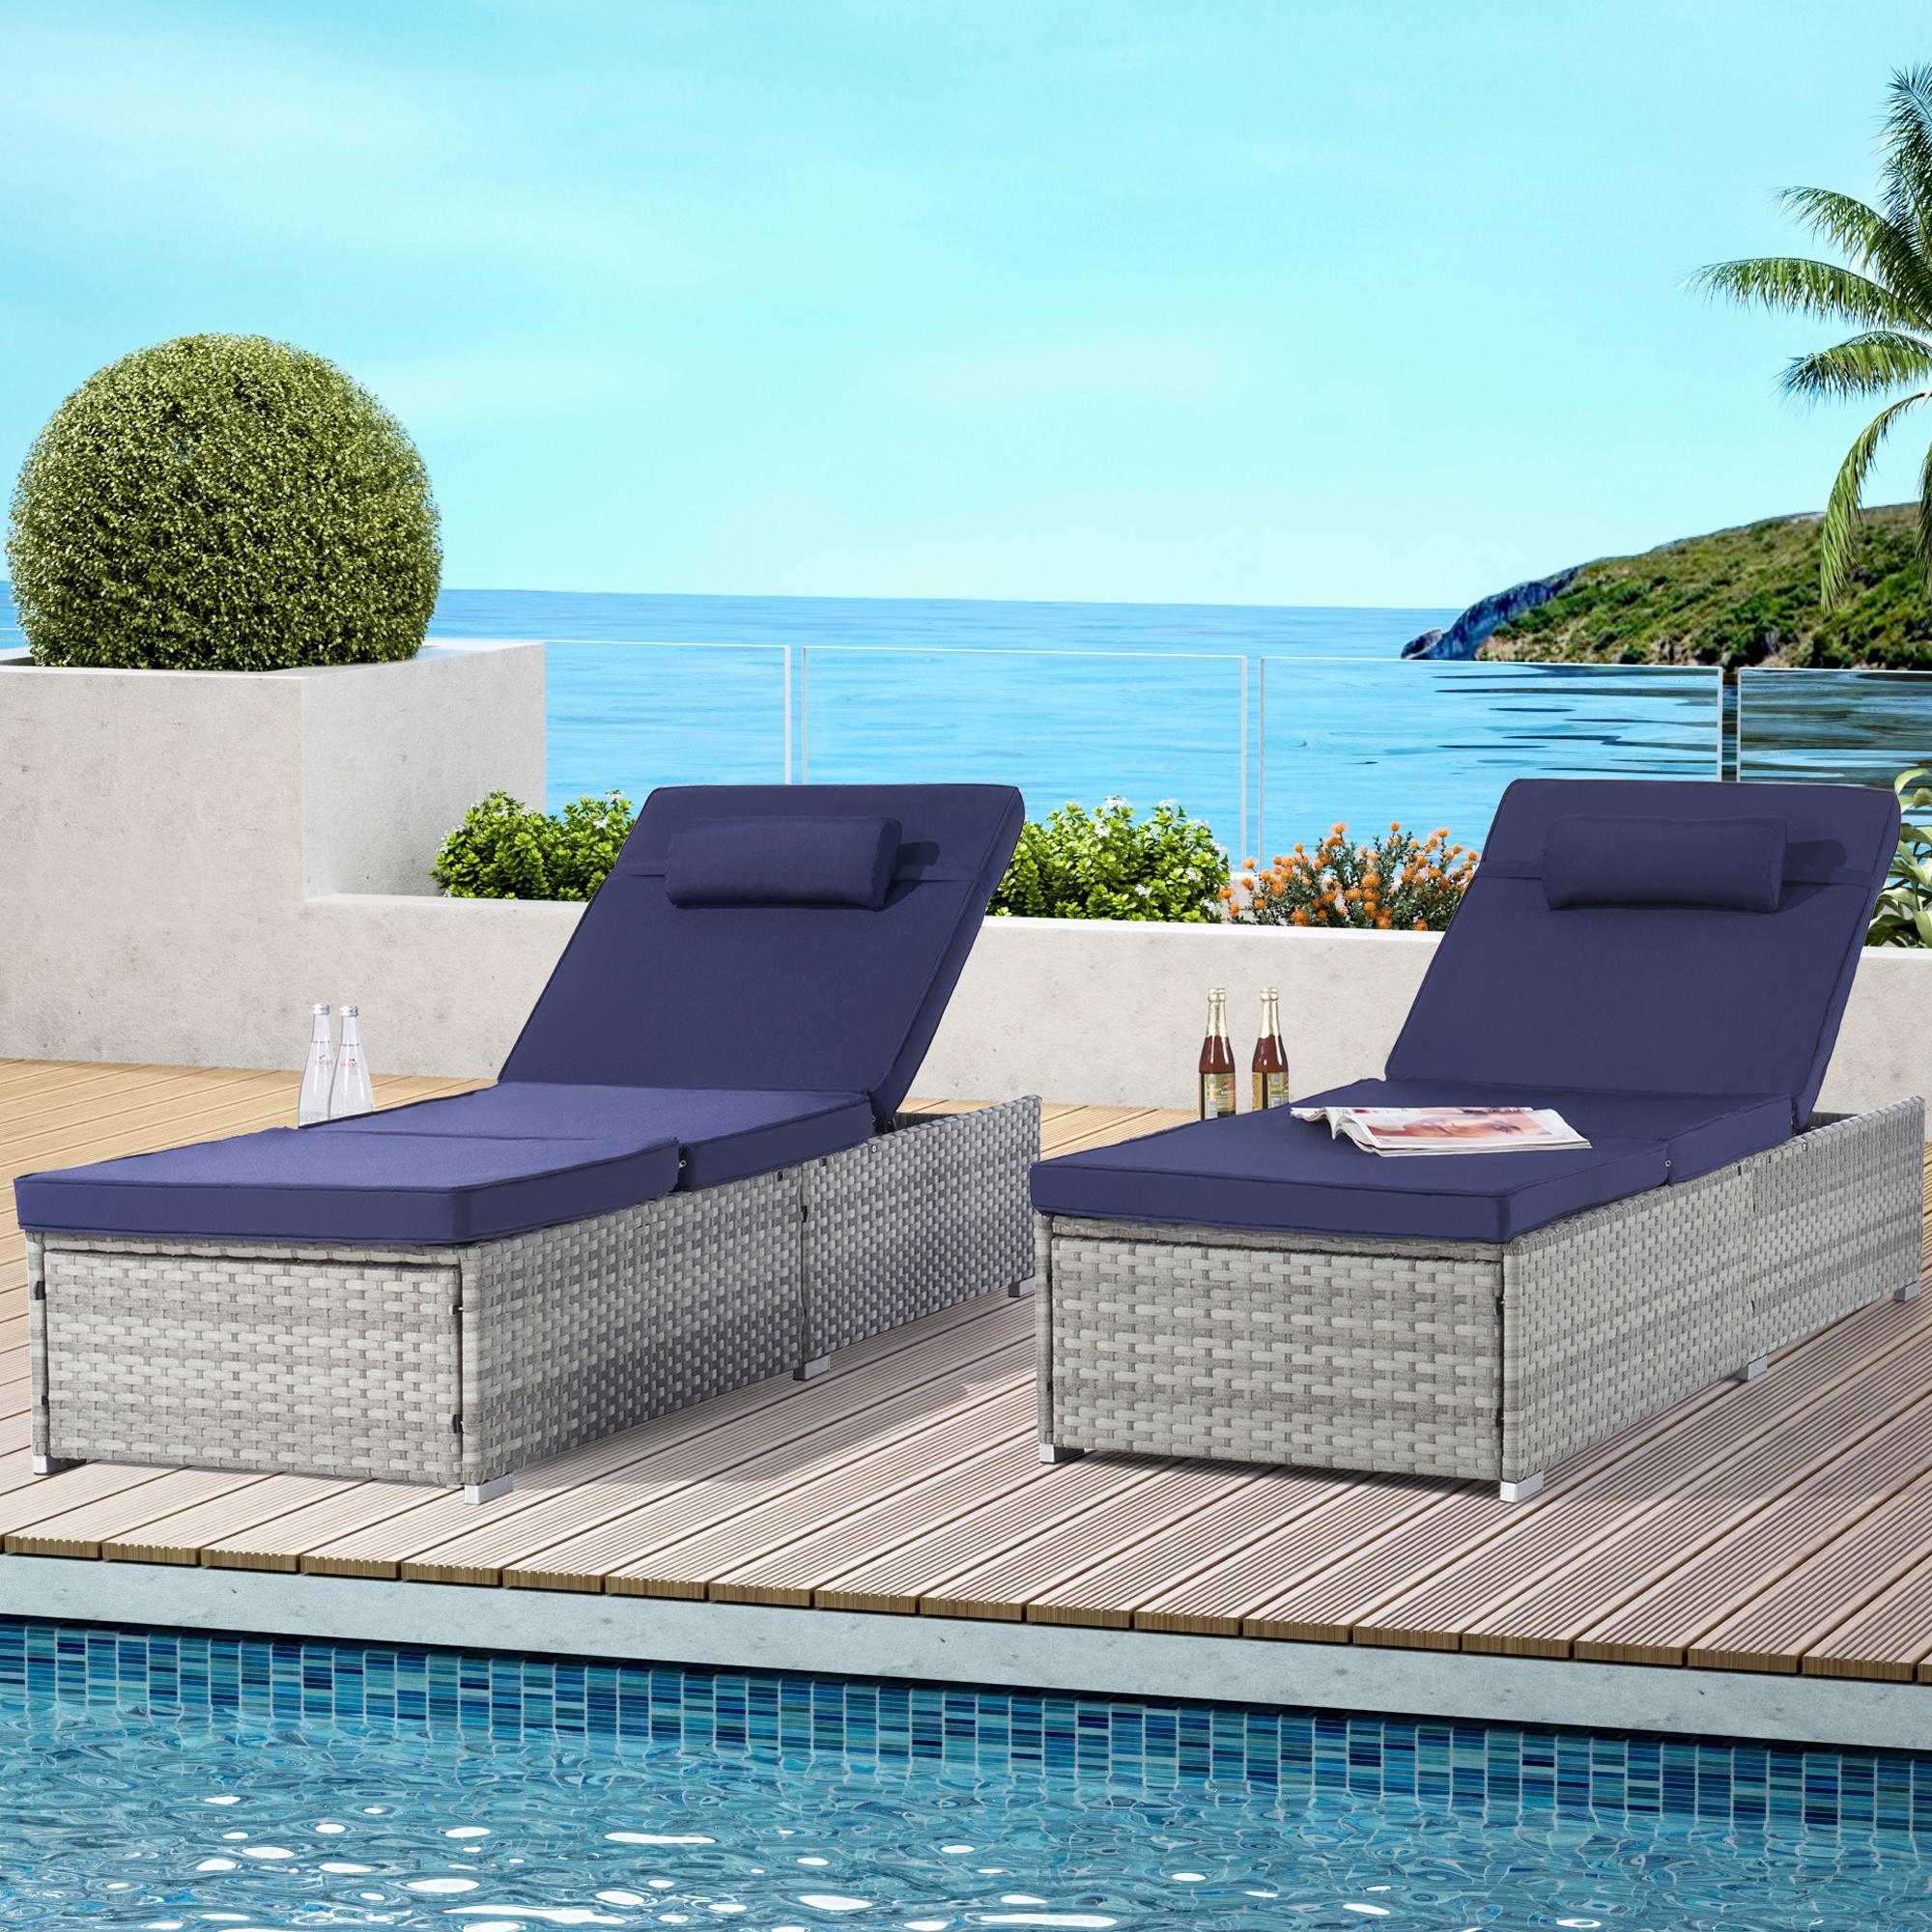 Chaise Lounge Chairs Set, Outdoor Lounger Reclining Chairs with 5 Adjustable Positions, Brown Wicker Patio Chaise Chair Furniture for Poolside, Deck, Backyard - image 2 of 10